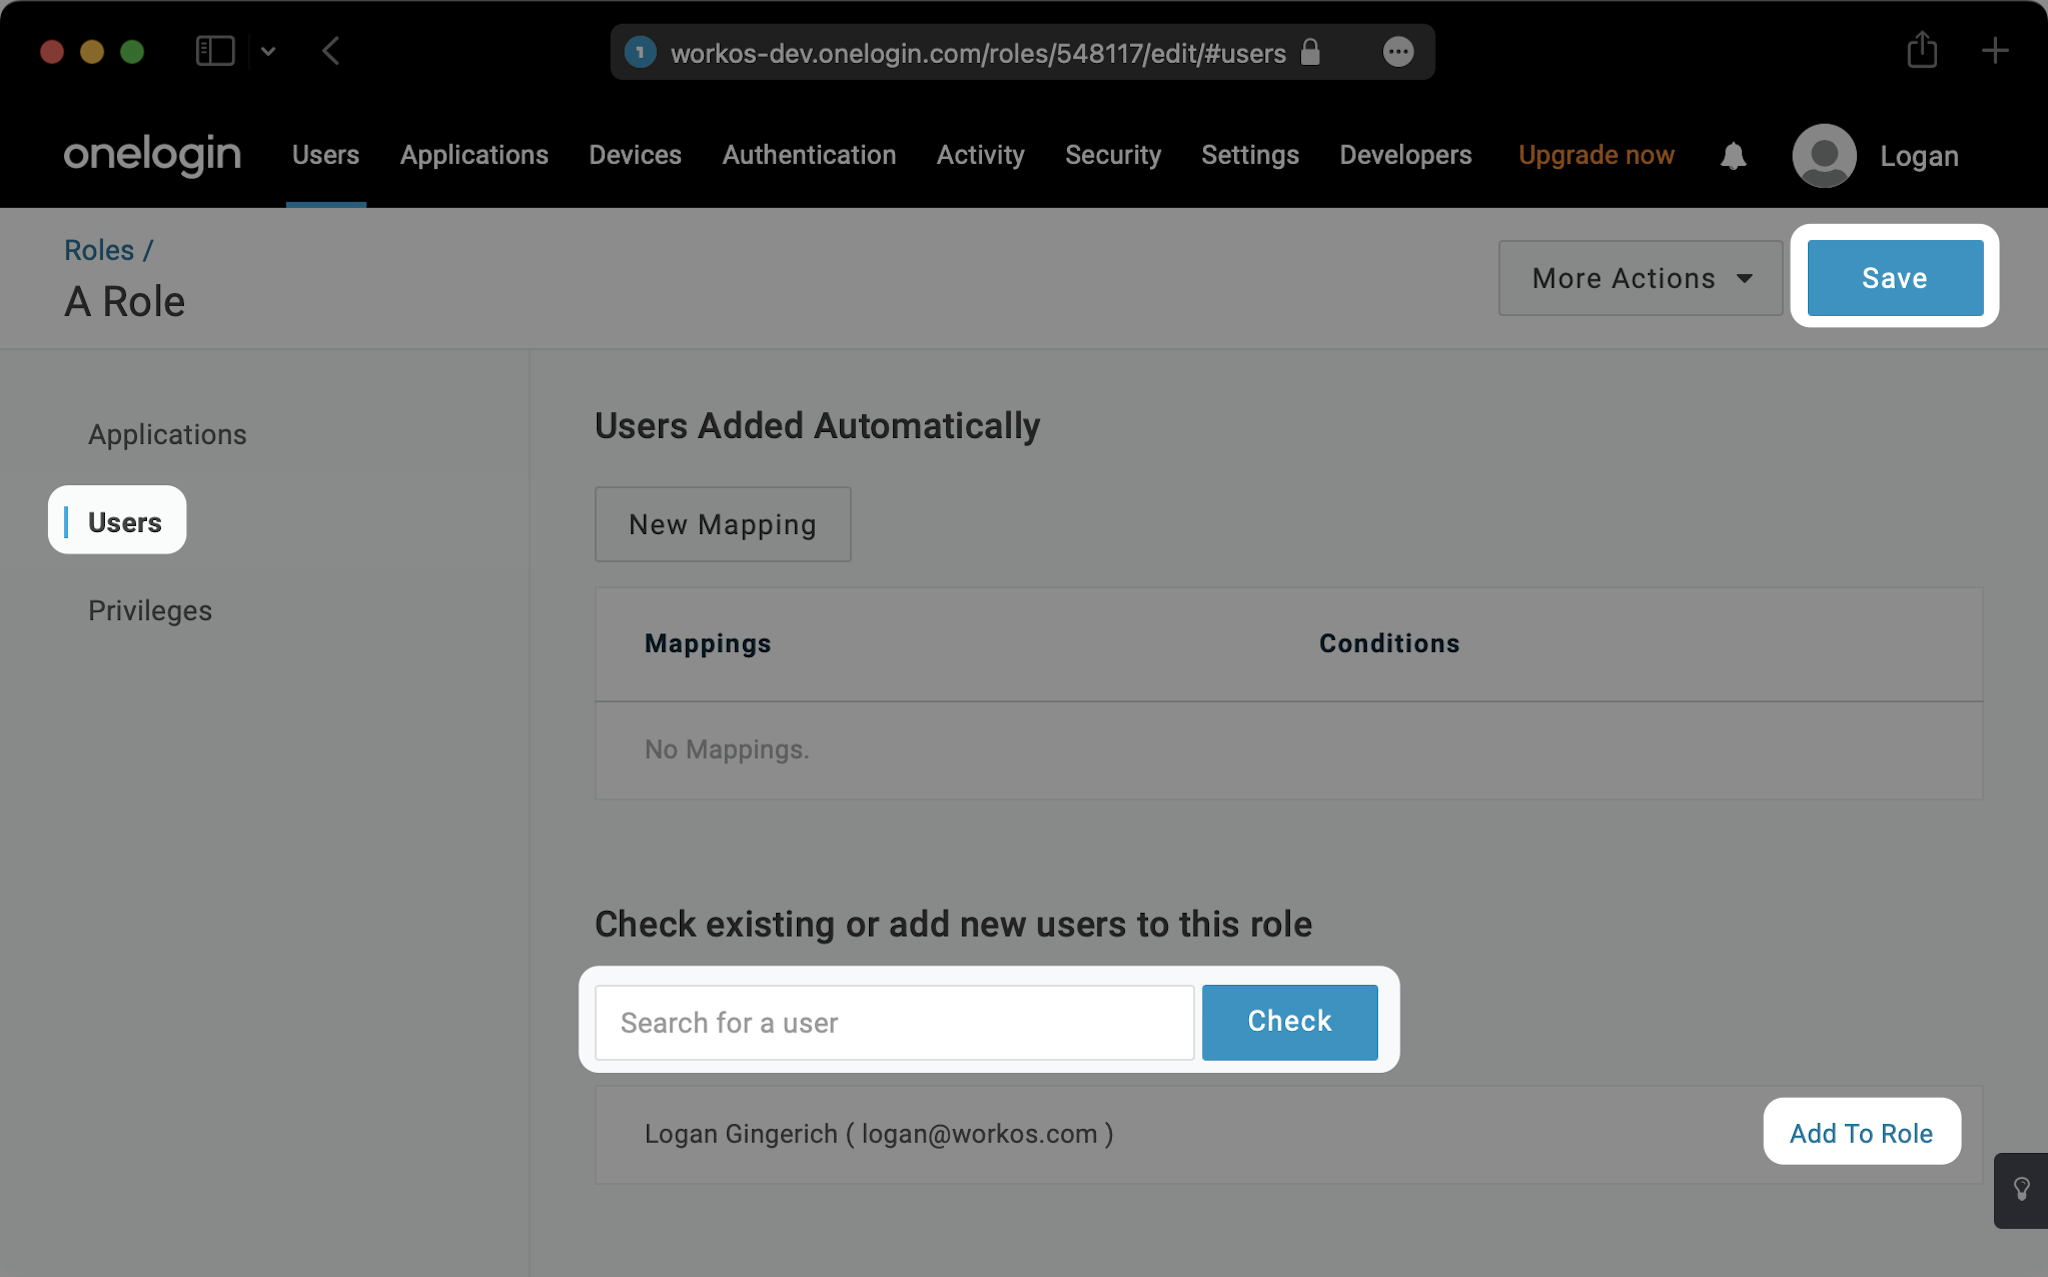 A screenshot showing how to add Users to "Role" in OneLogin